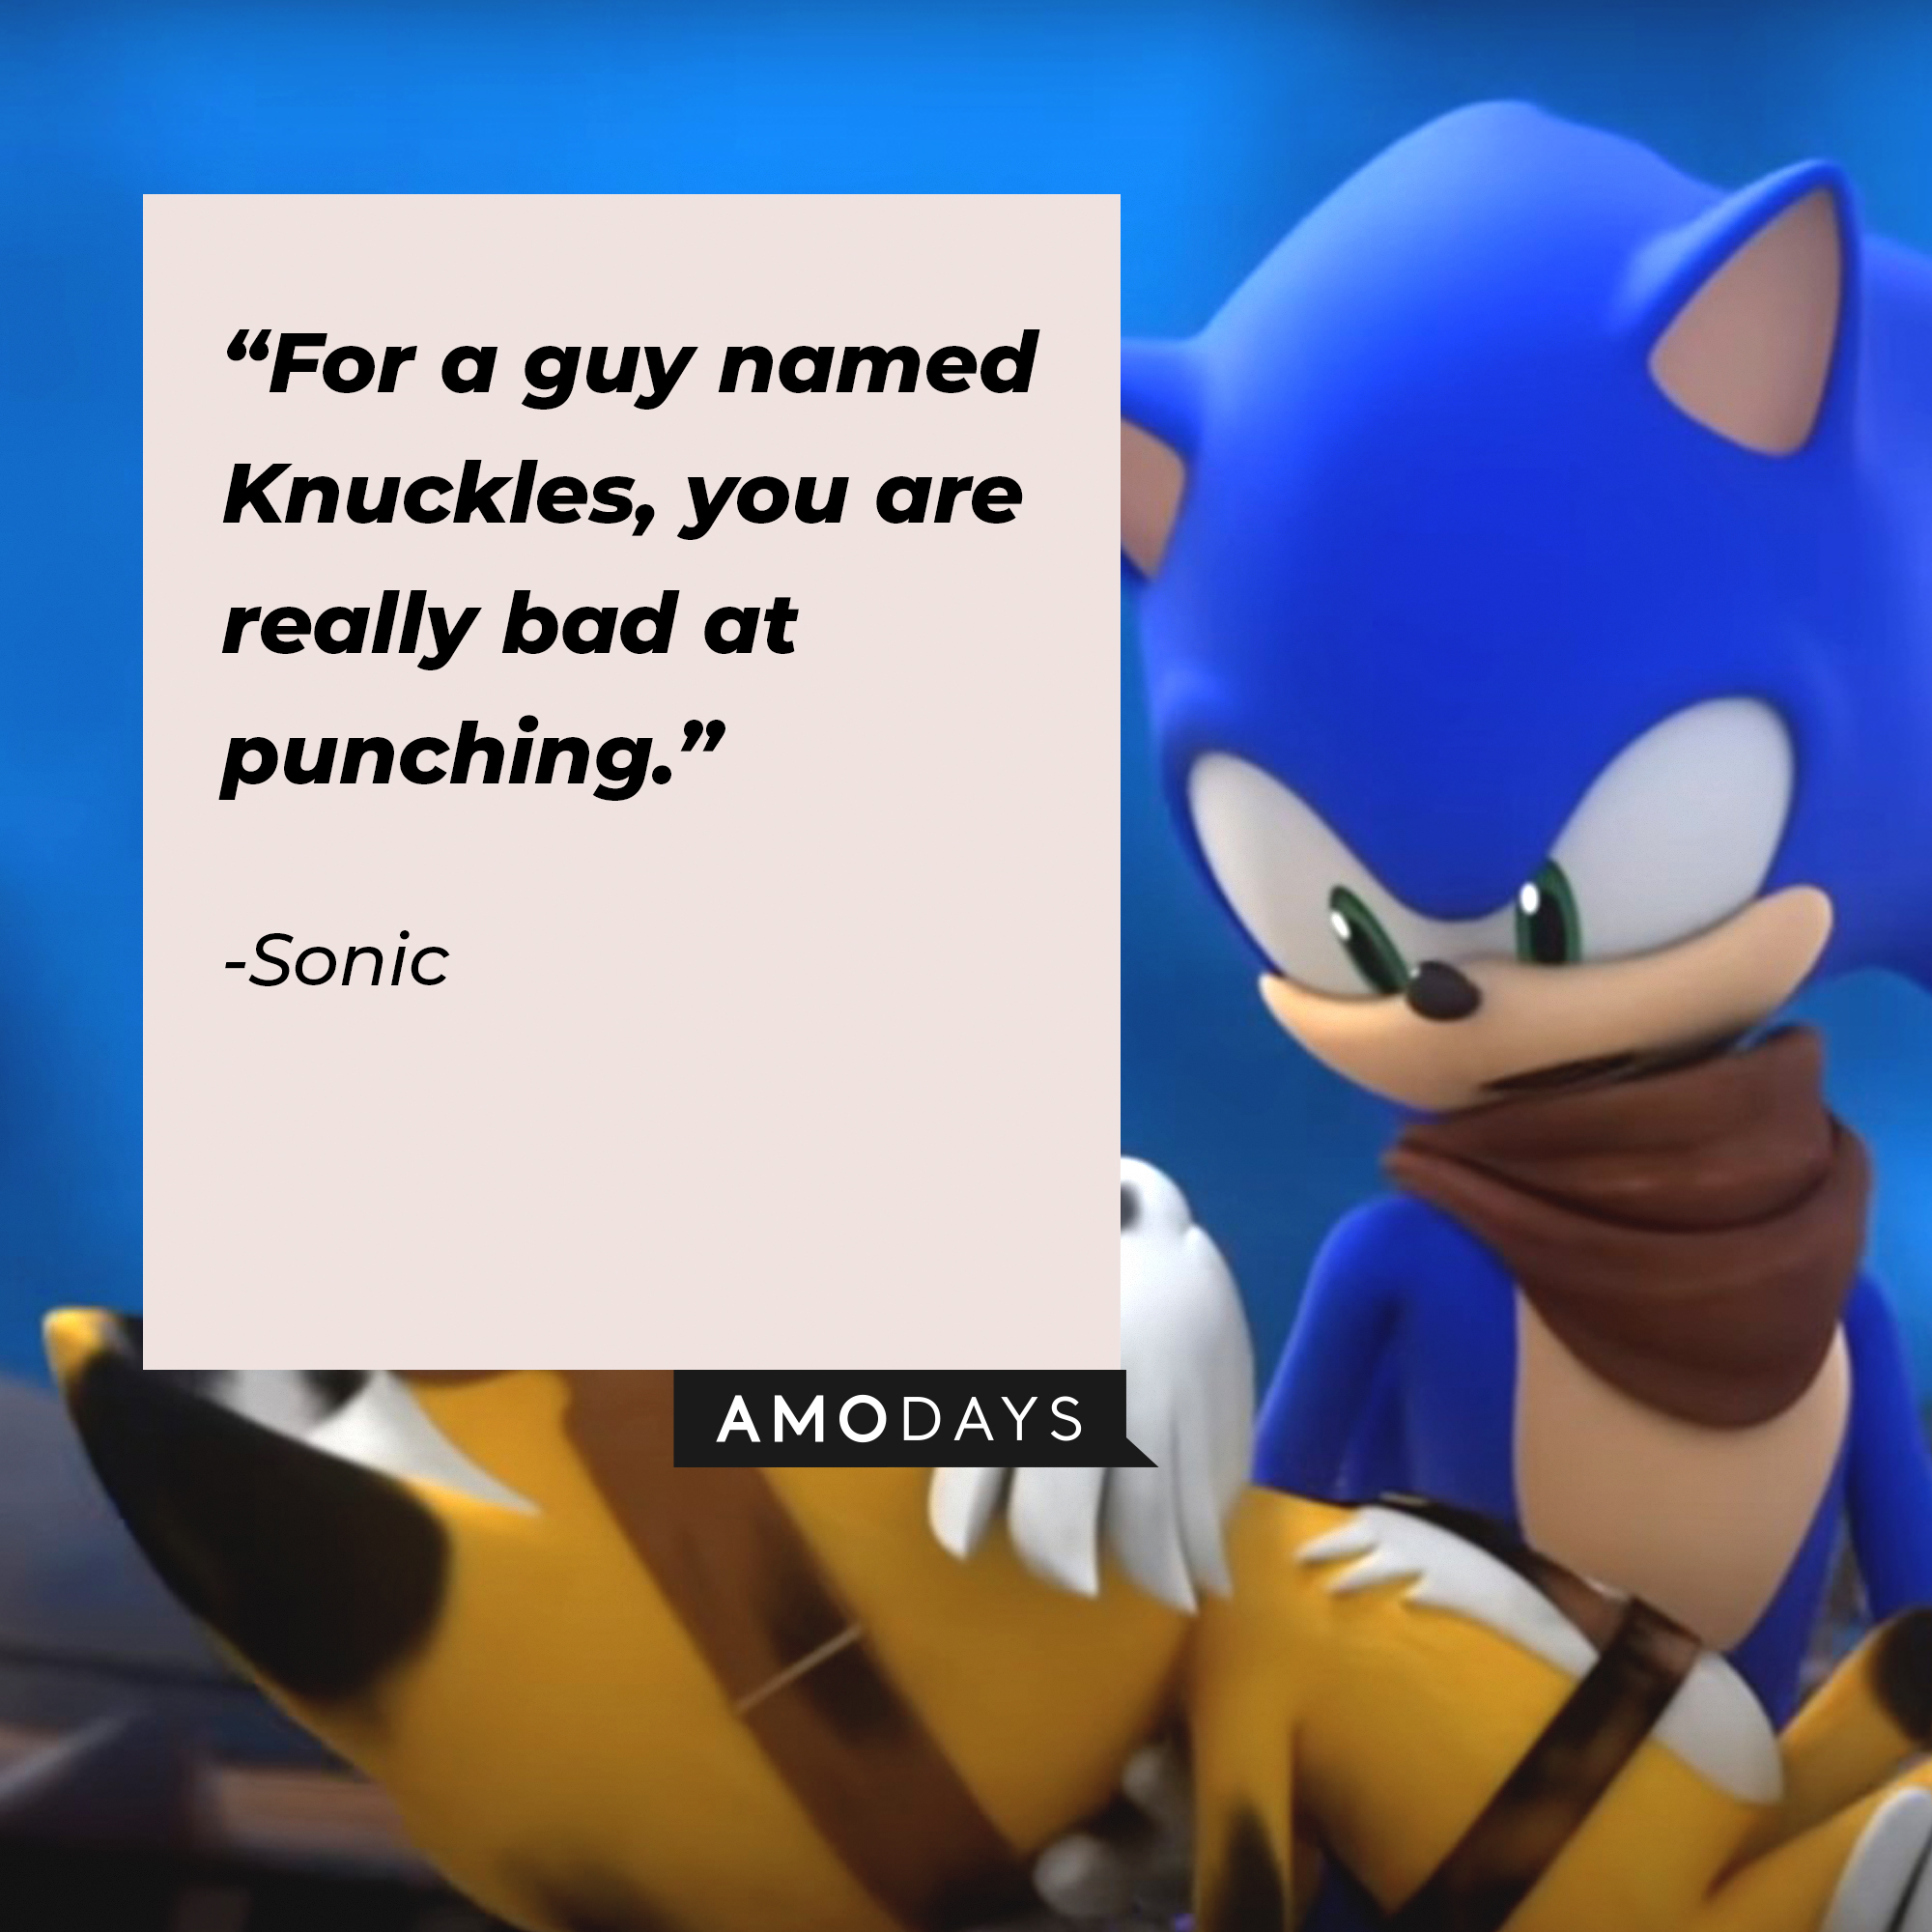 An image of Sonic the Hedgehog with his quote: “For a guy named Knuckles, you are really bad at punching.” | Source: youtube.com/Sonic.Boom_Official